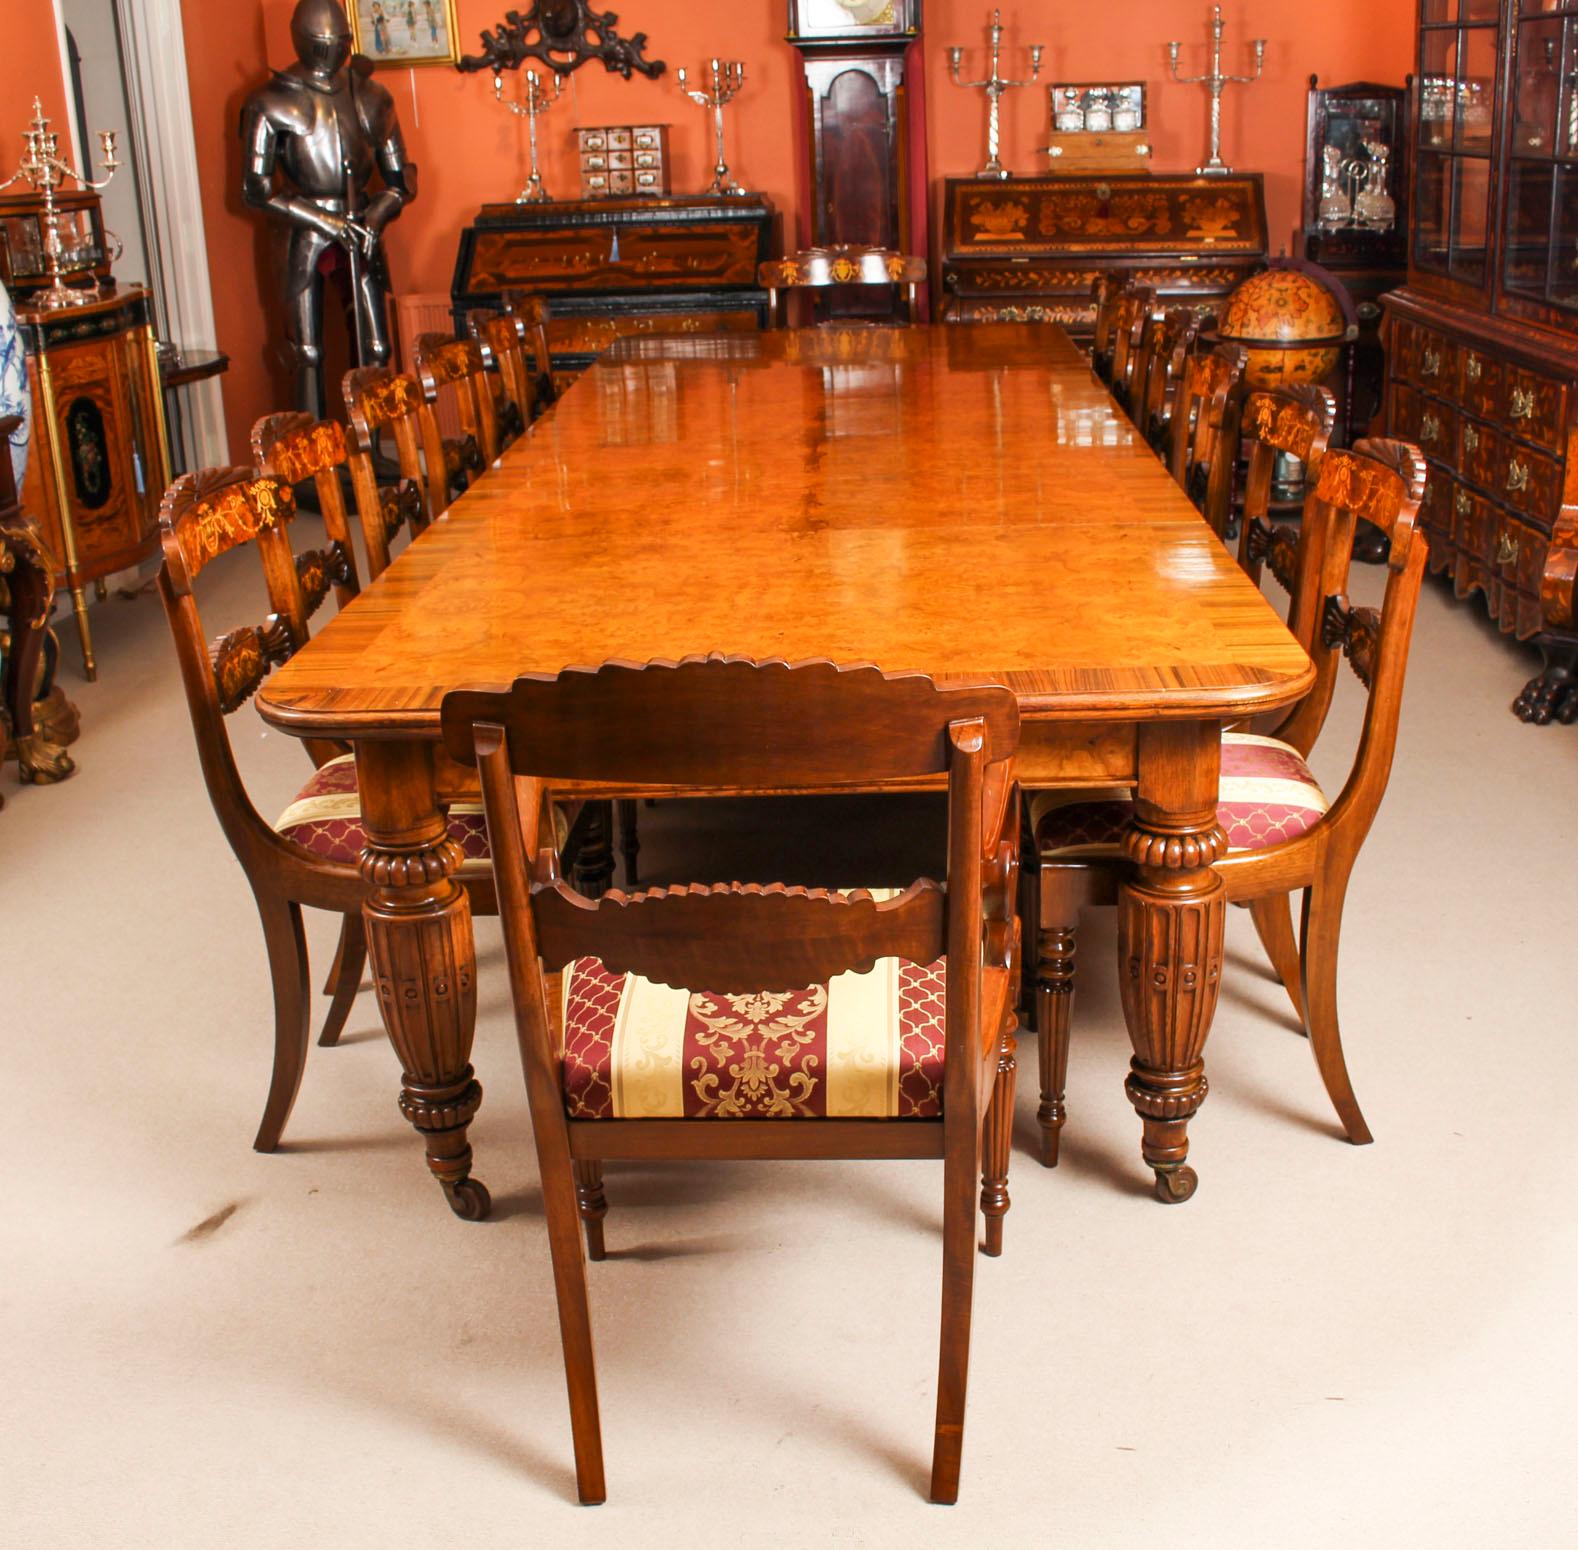 There is no mistaking the style and sophisticated design of this exquisite dining set comprising a rare English antique Victorian pollard oak extending dining table, circa 1860 in date and a set of twelve contemporary inlaid dining chairs.
The